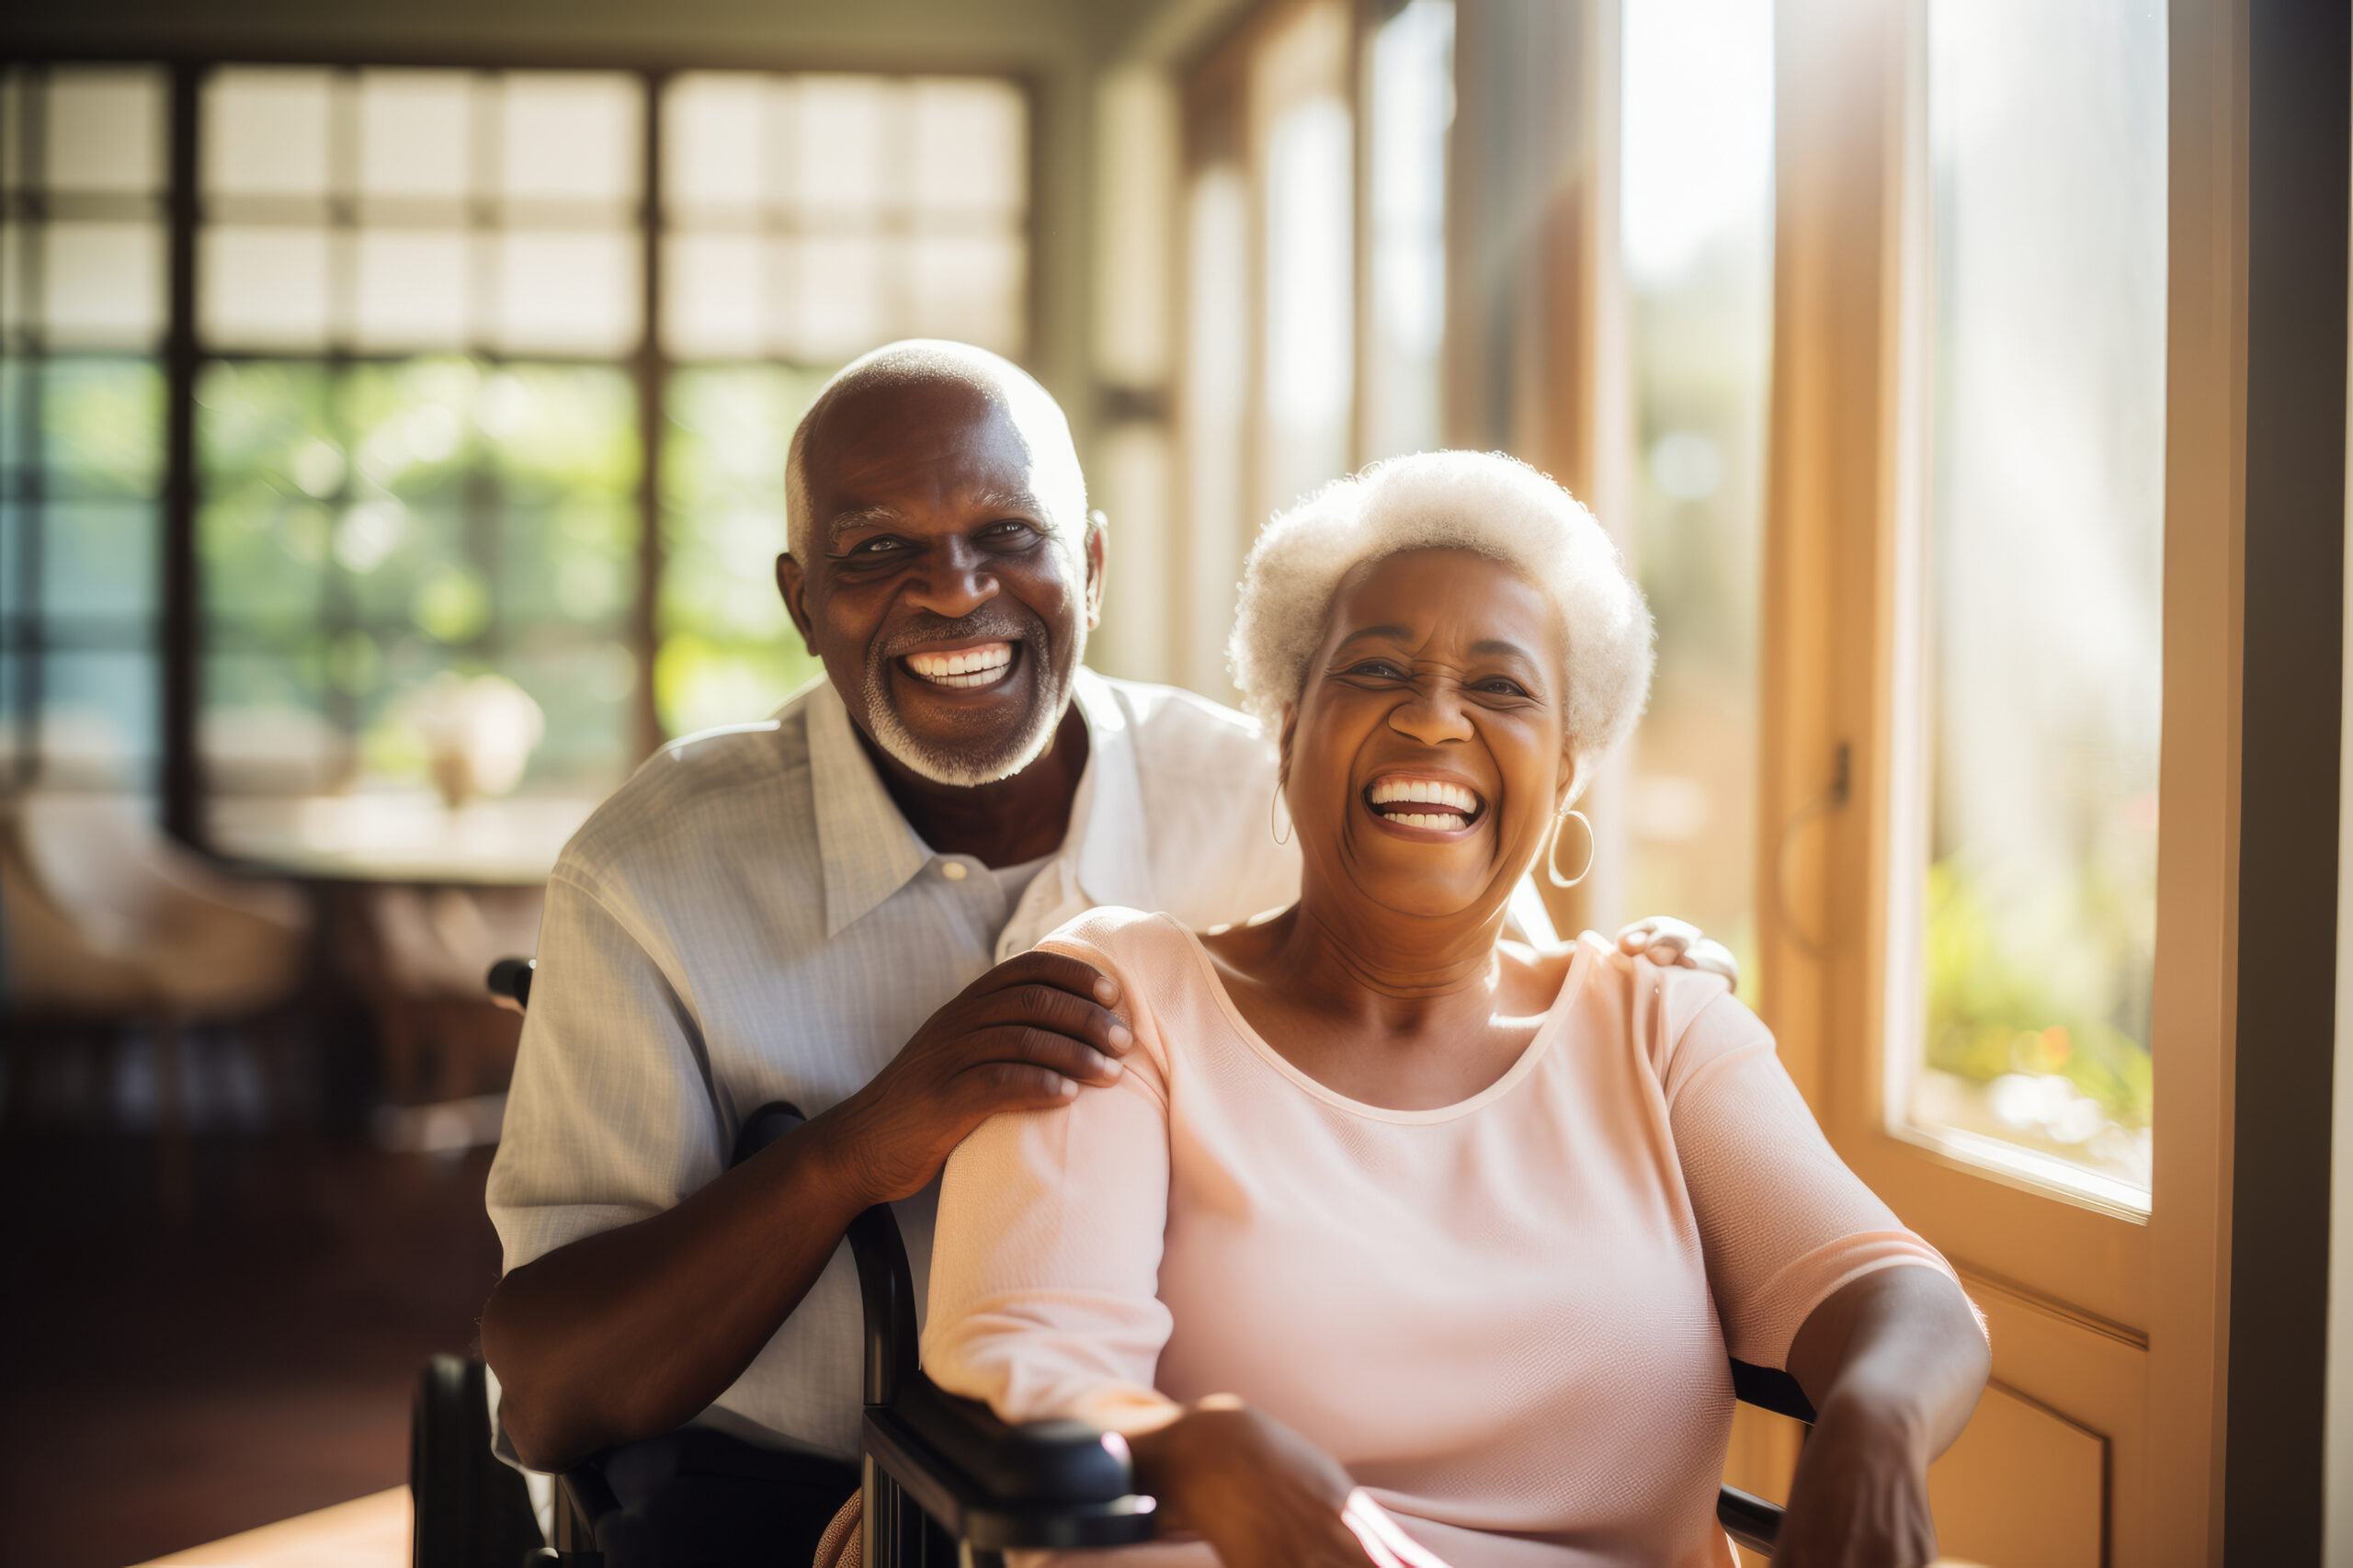 Beautiful Loving Couple In A Retirement Home Senior Man In A Wheelchair Laughing Happily With A Senior Lady In A Nursing Home Housing Facility Intended For The Elderly People